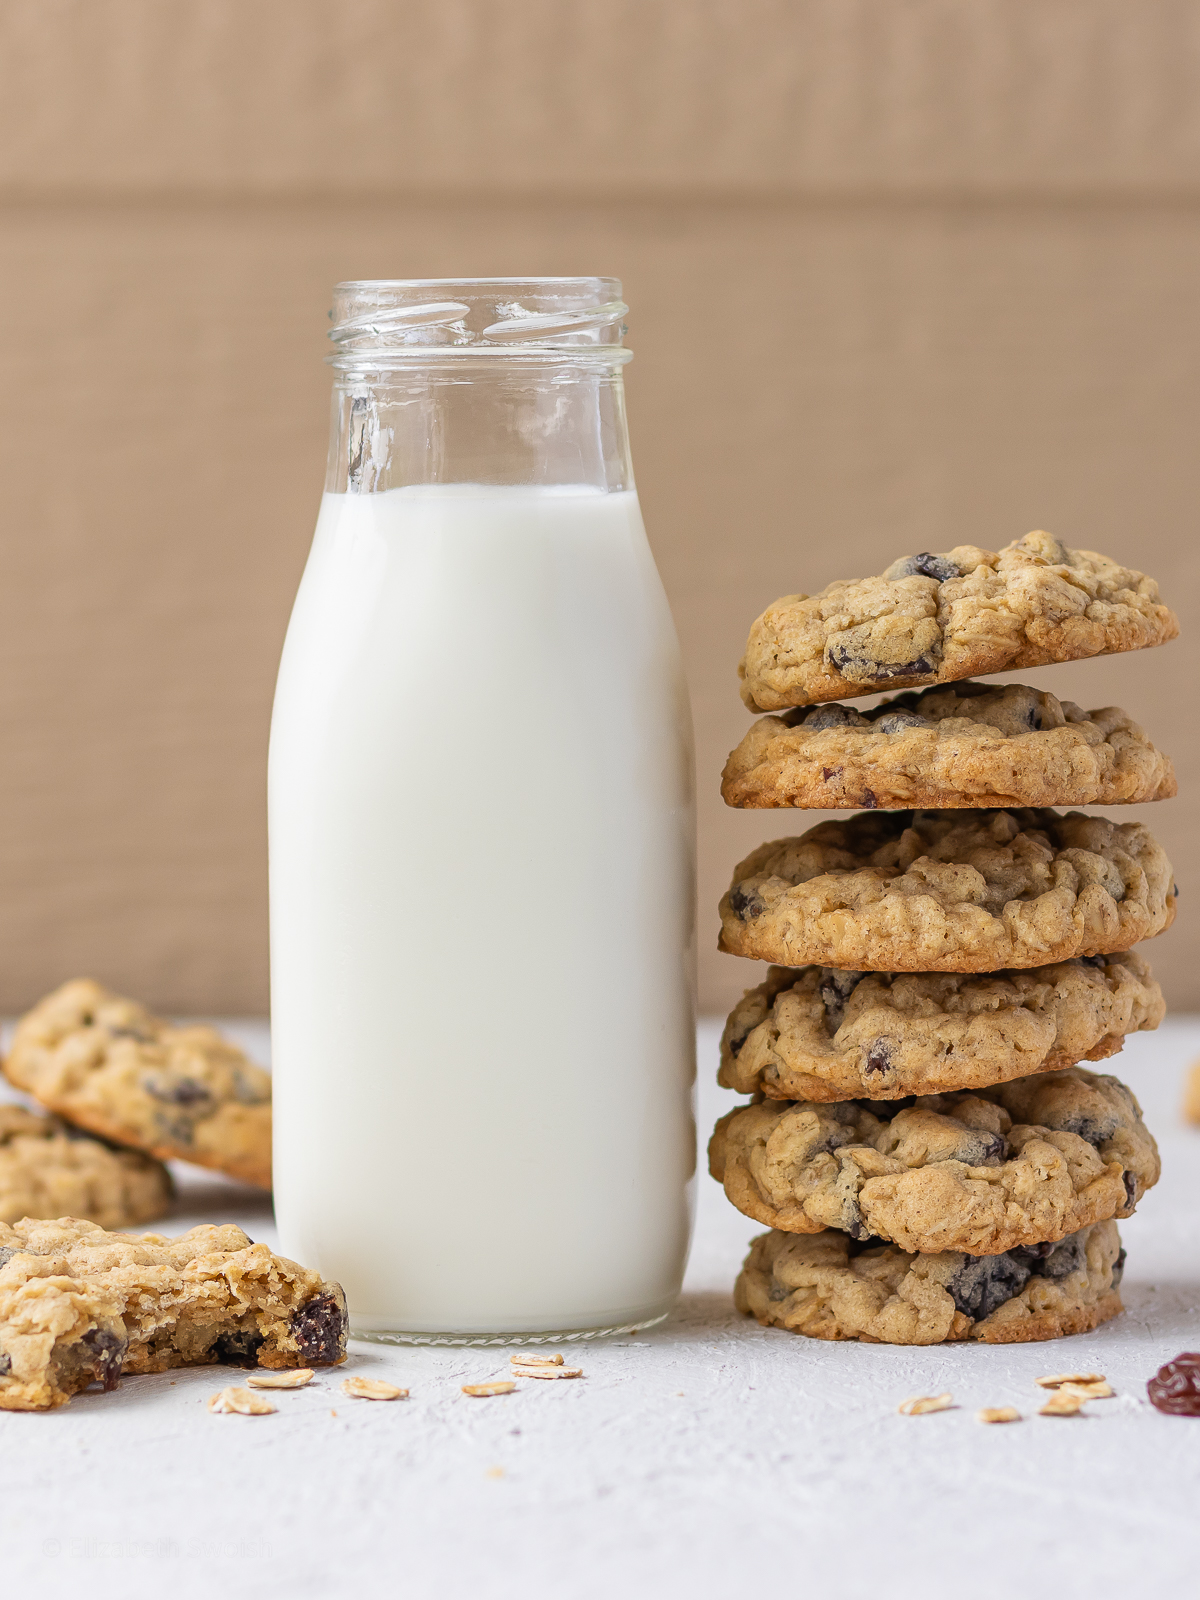 Tall stack of old fashioned oatmeal raisin cookies with a glass of milk and a half eaten cookie on the side.